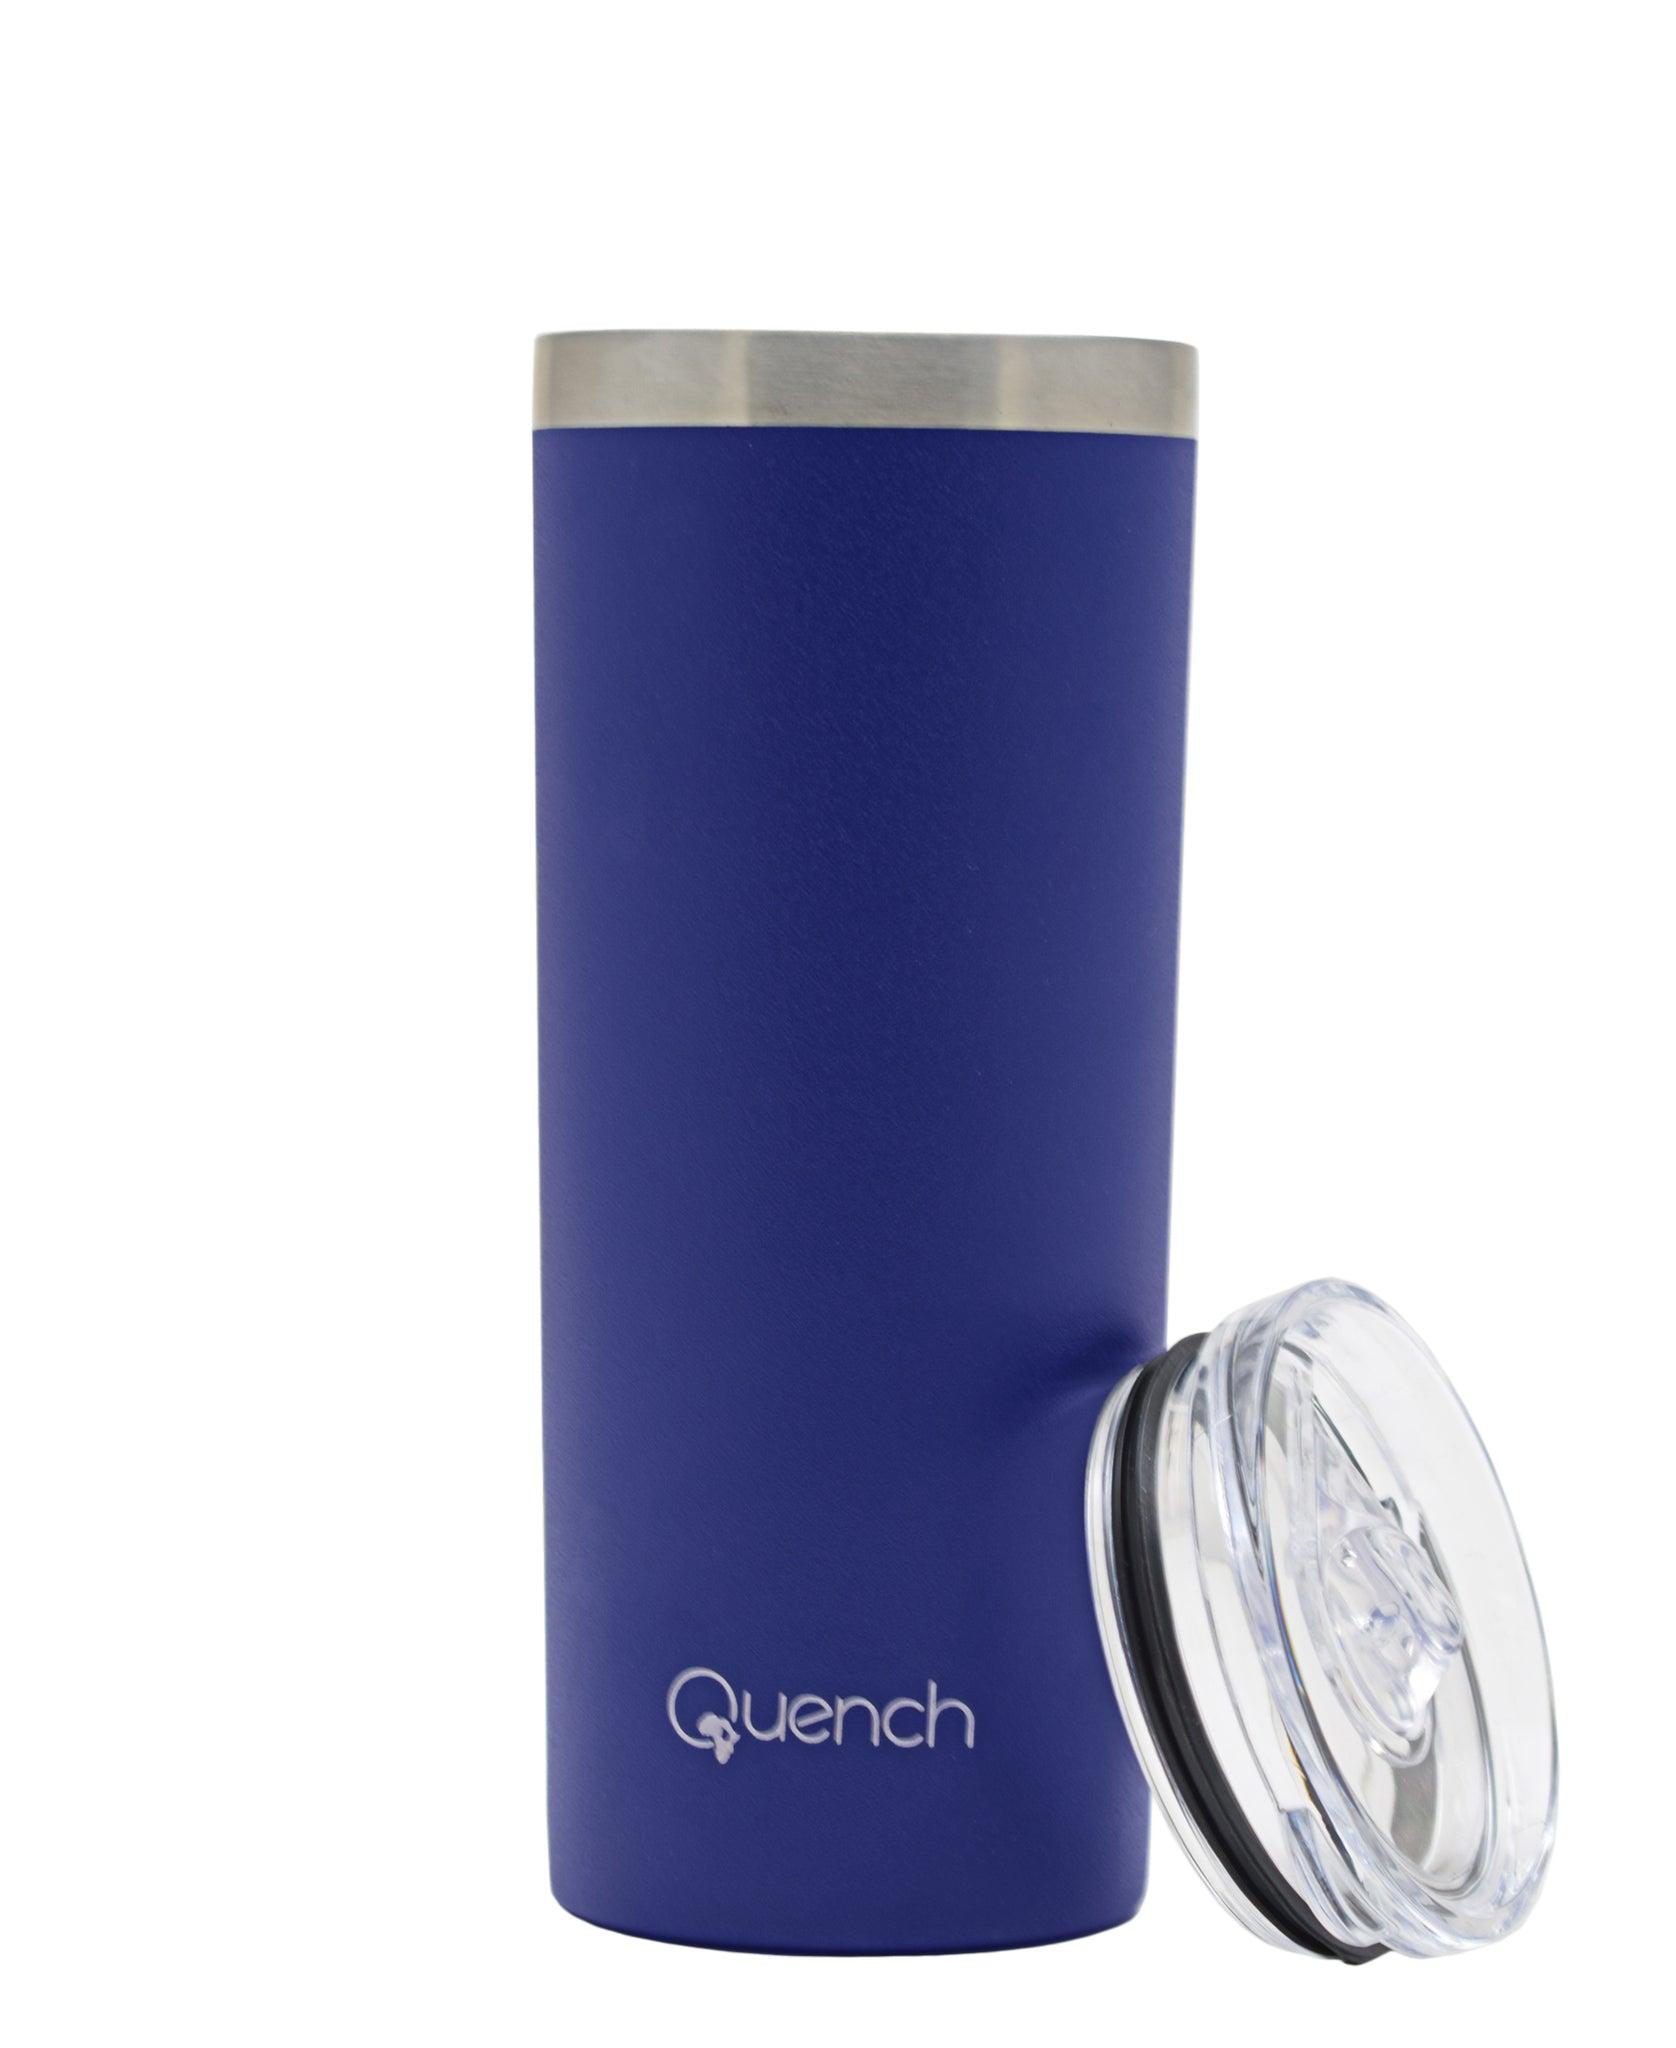 Quench 500ml Stainless Steel Travel Buddy - Blue